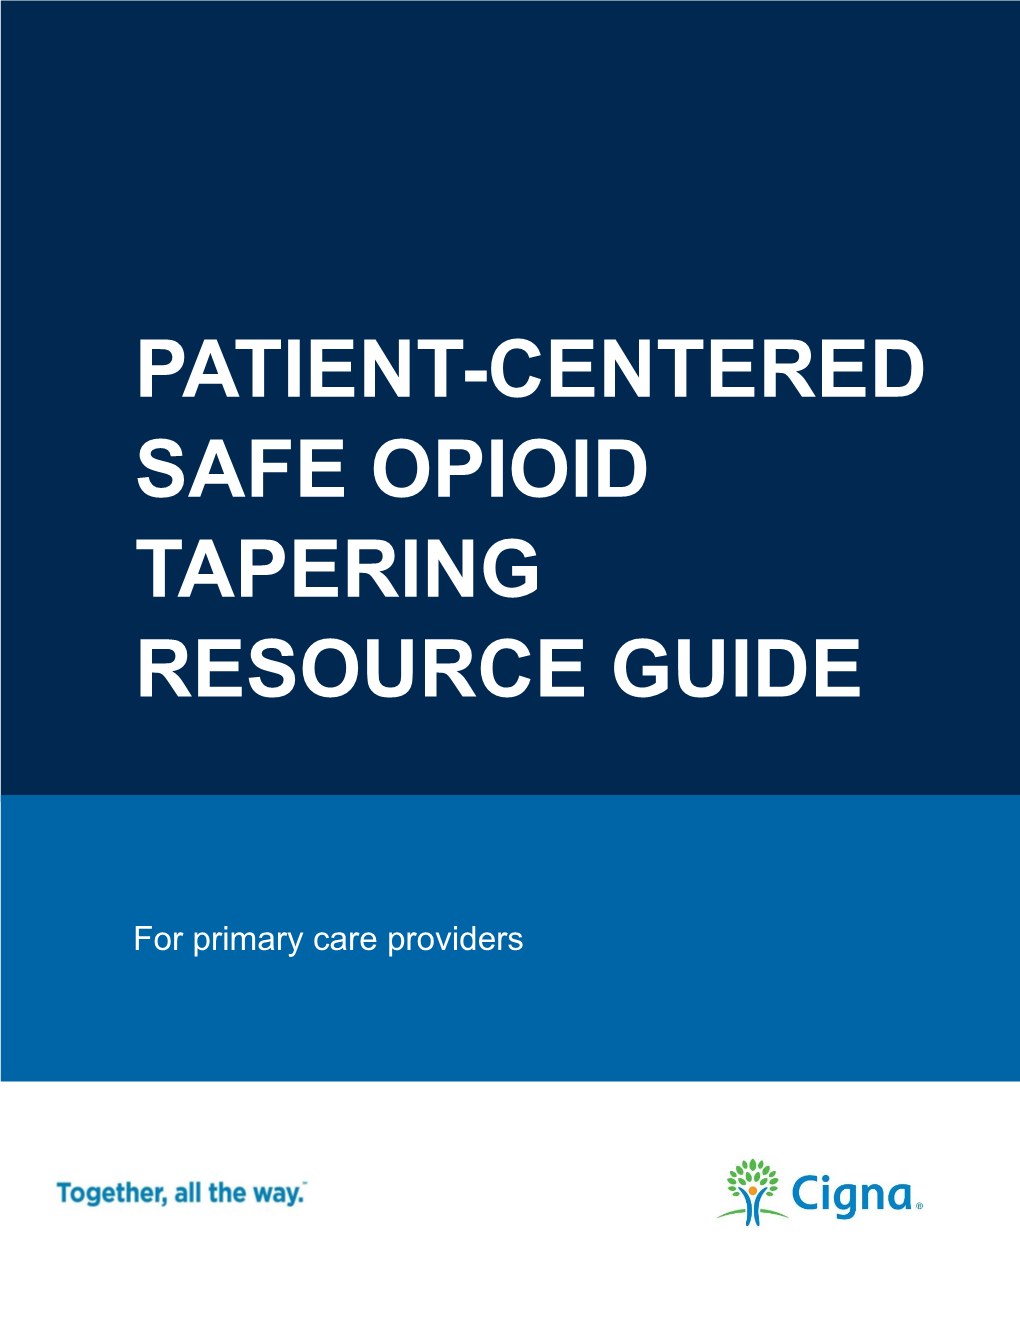 PATIENT-CENTERED SAFE OPIOID TAPERING RESOURCE GUIDE September 2019